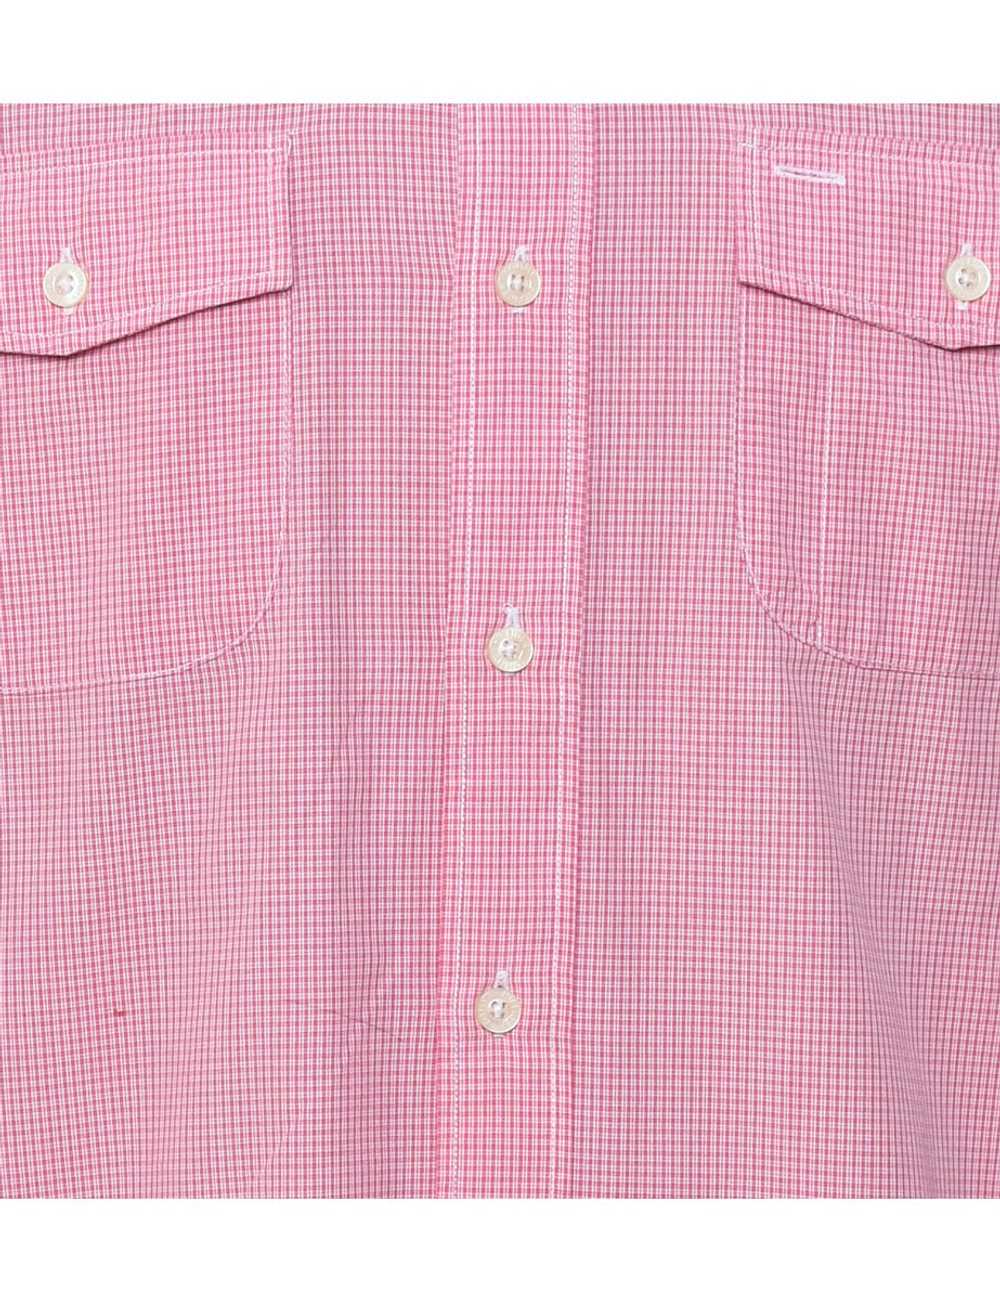 Tommy Hilfiger Checked Pale Pink & White Shirt - L - image 3